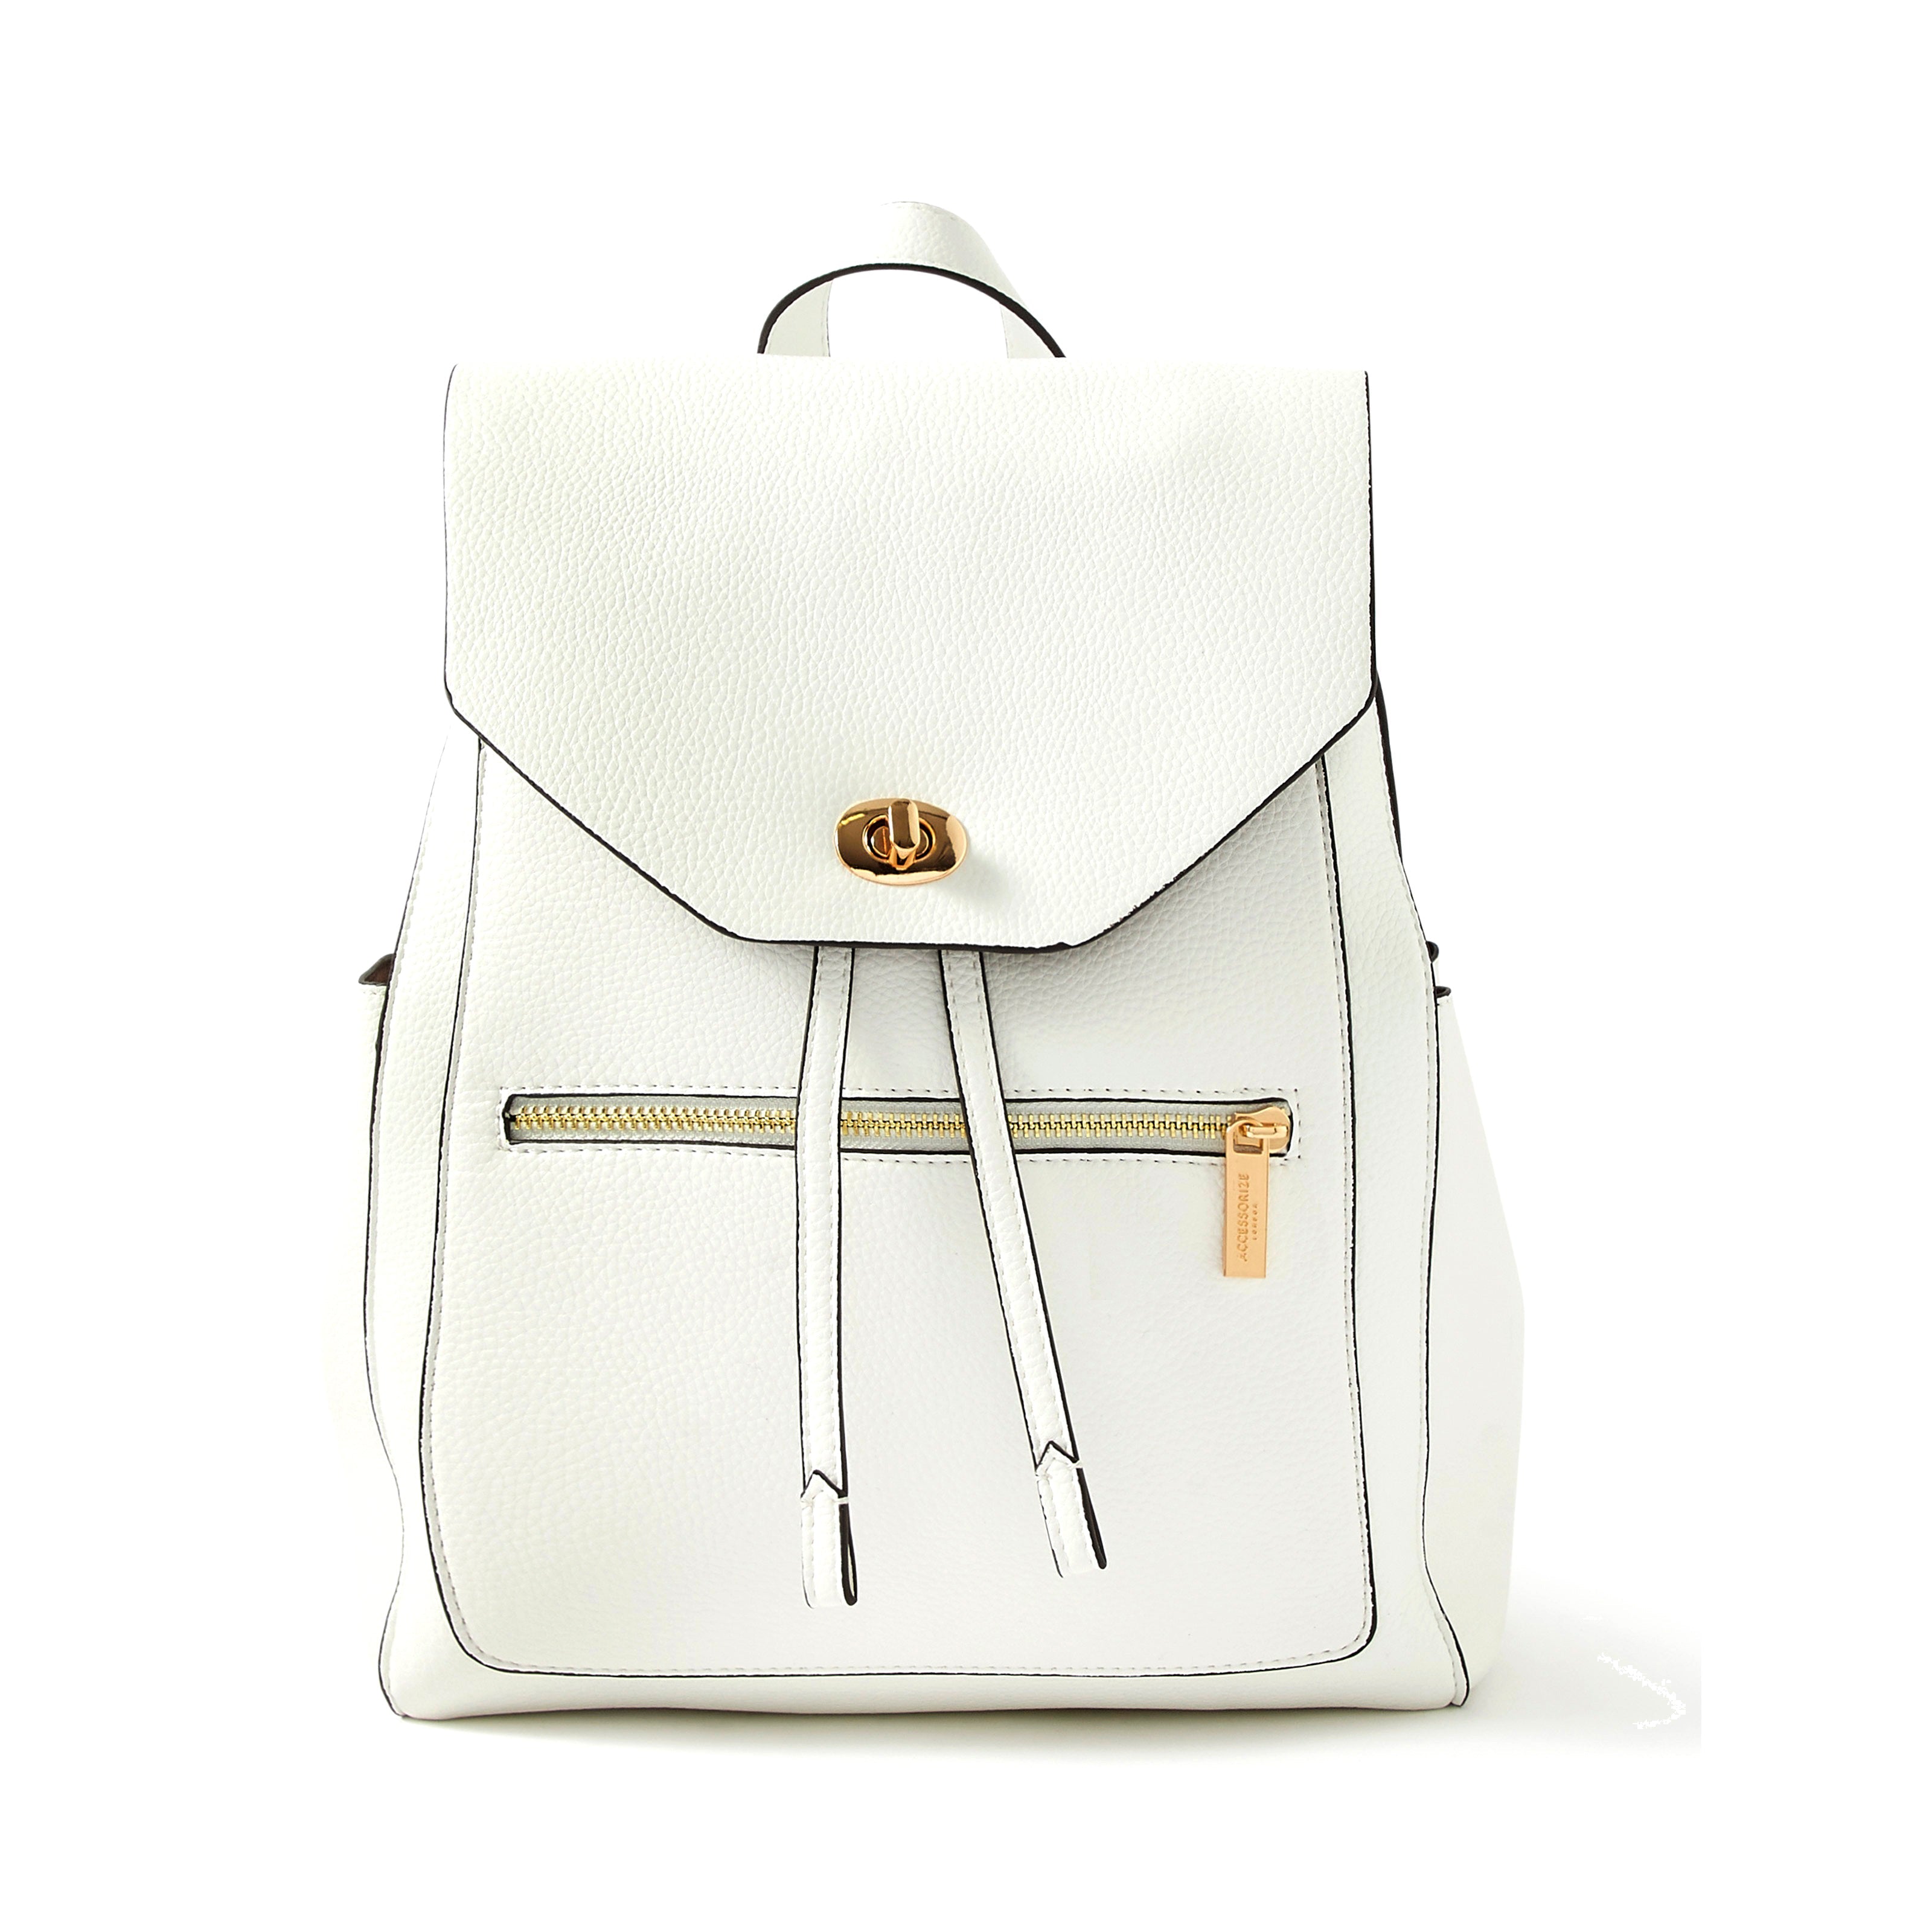 Accessorize London Women's Faux Leather White Nikki zip backpack bag